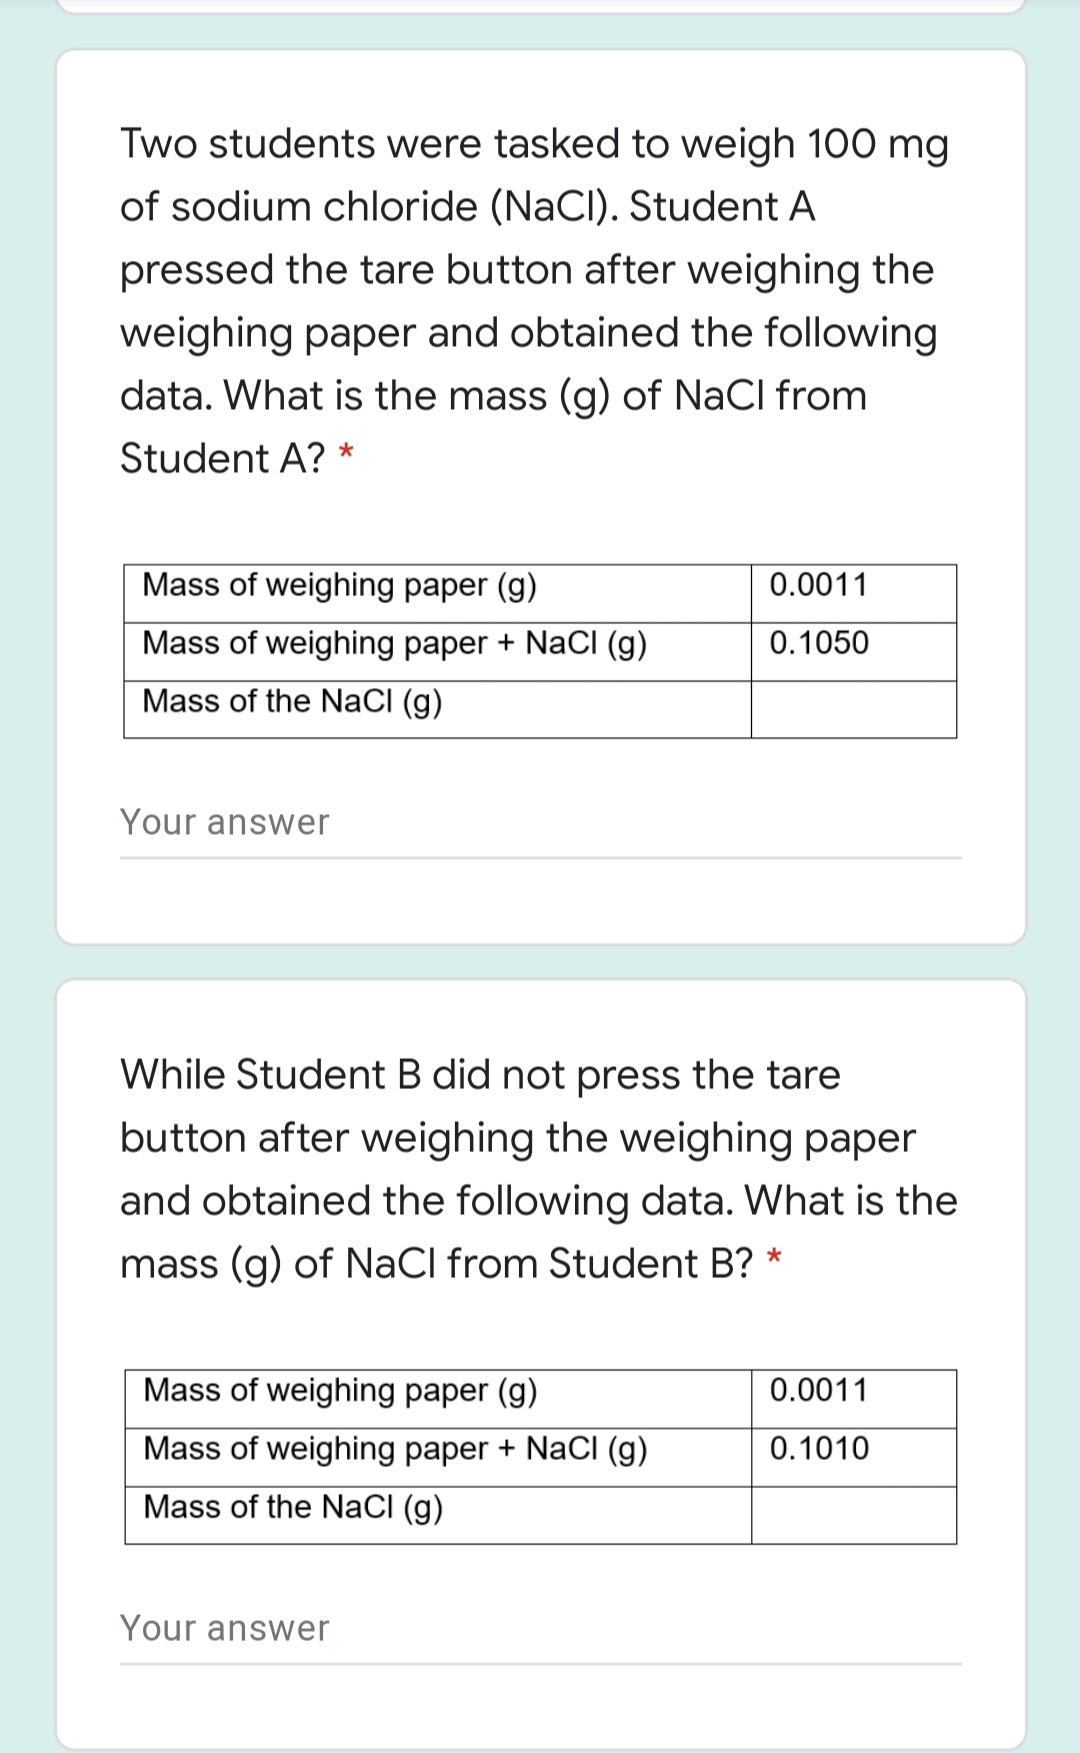 Two students were tasked to weigh 100 mg
of sodium chloride (NaCI). Student A
pressed the tare button after weighing the
weighing paper and obtained the following
data. What is the mass (g) of NaCl from
Student A?
Mass of weighing paper (g)
0.0011
Mass of weighing paper + NaCl (g)
0.1050
Mass of the NaCI (g)
Your answer
While Student B did not press the tare
button after weighing the weighing paper
and obtained the following data. What is the
mass (g) of NaCl from Student B? *
Mass of weighing paper (g)
0.0011
Mass of weighing paper + NaCI (g)
0.1010
Mass of the NaCI (g)
Your answer
